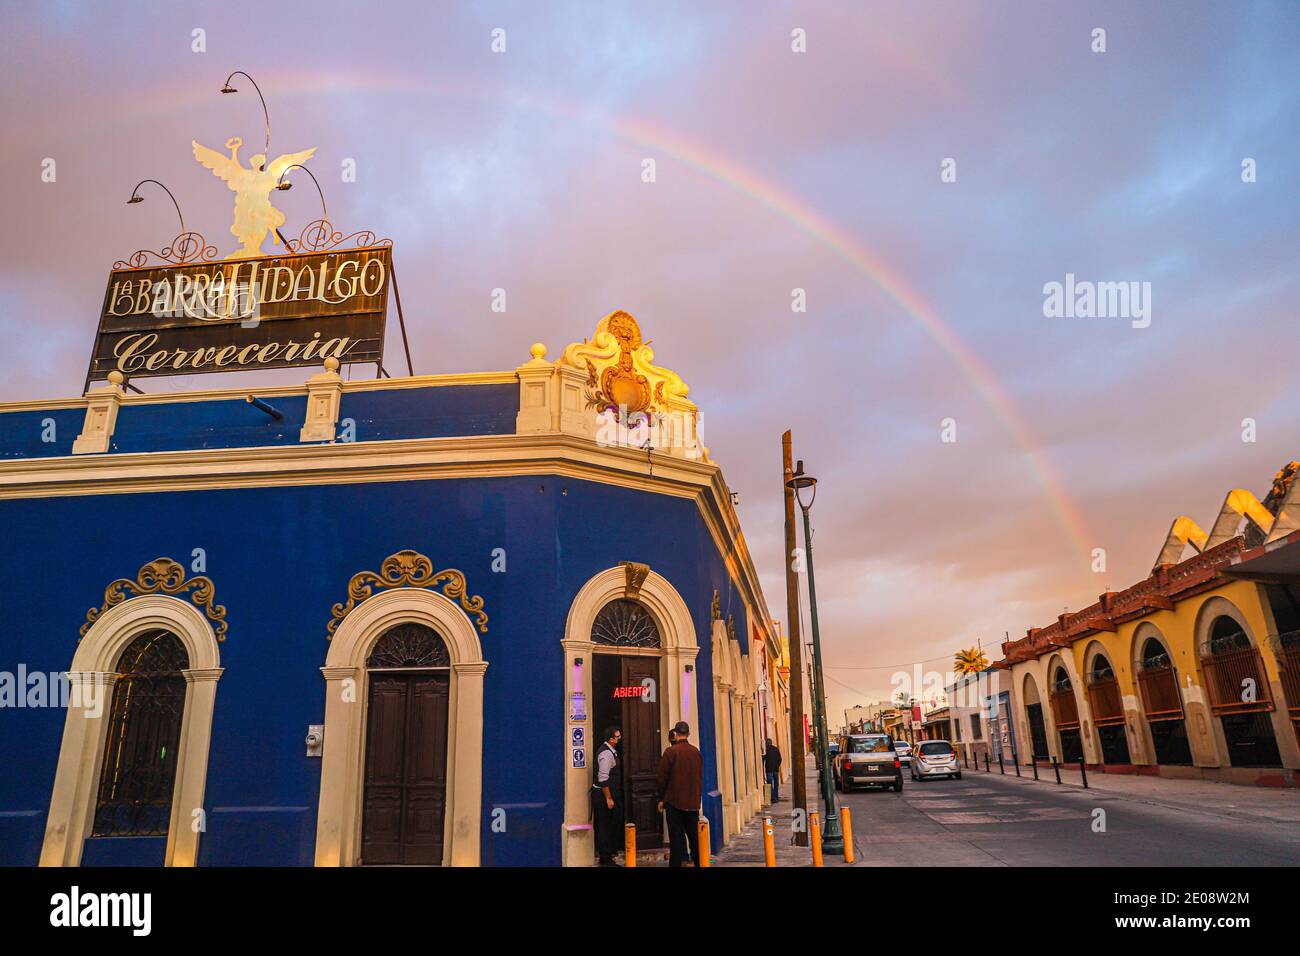 A rainbow is observed over the Barra Hidalgo bar or brewery on a cloudy day  during a winter afternoon on December 29, 2020 in Hermosillo, Mexico.  (Photo by Luis Gutierrez / Norte